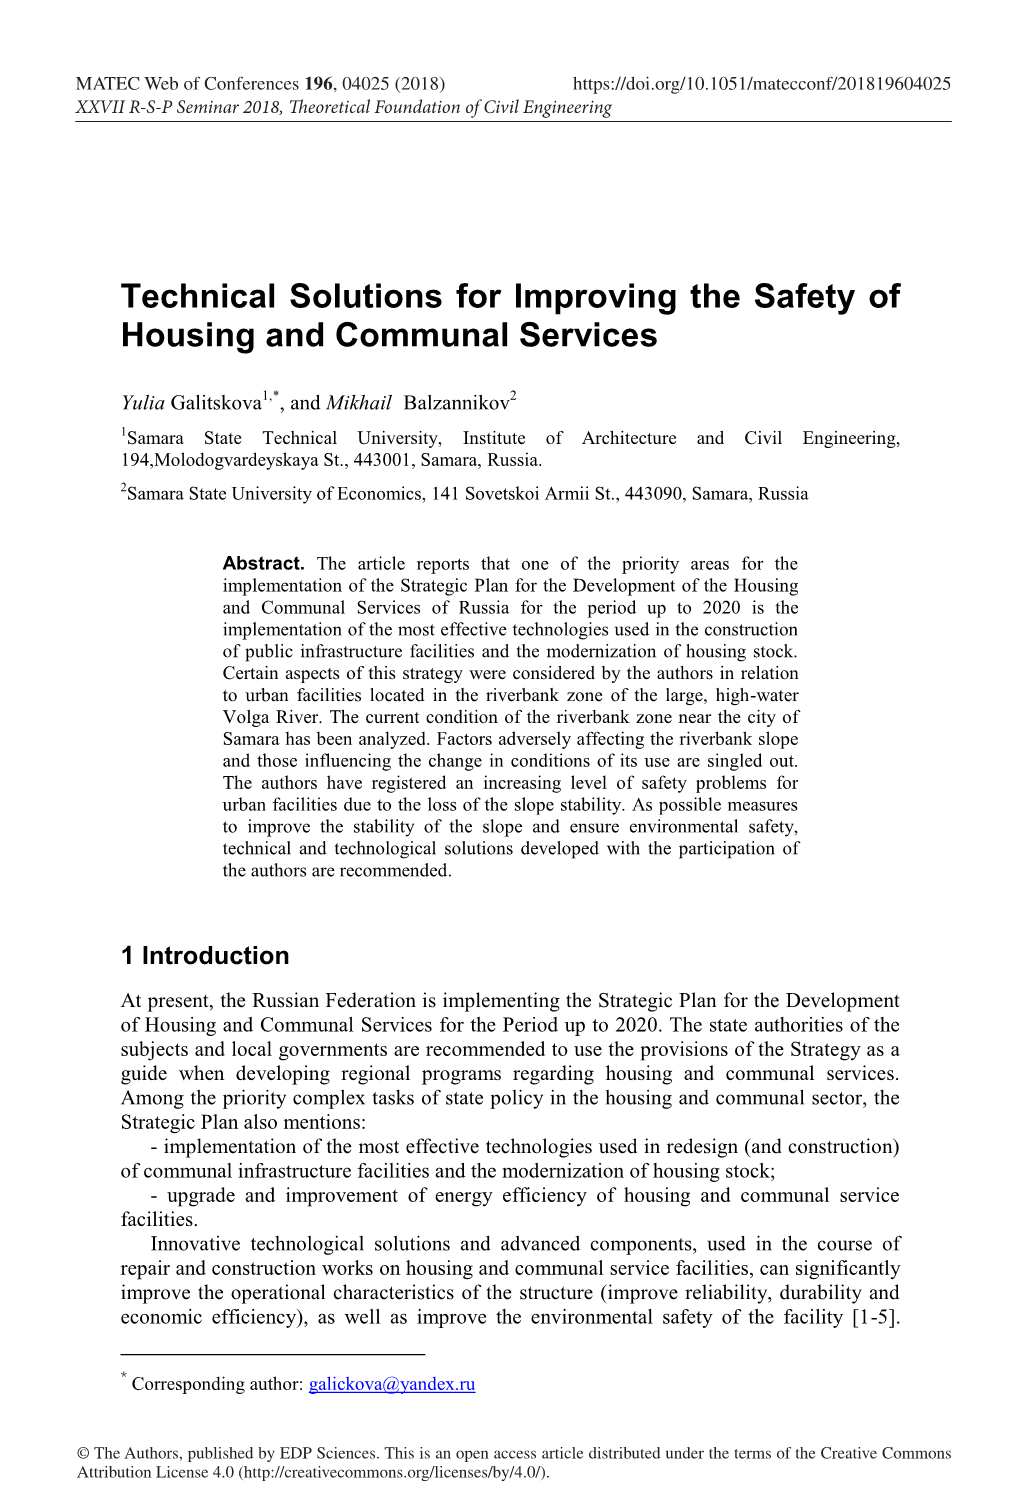 Technical Solutions for Improving the Safety of Housing and Communal Services